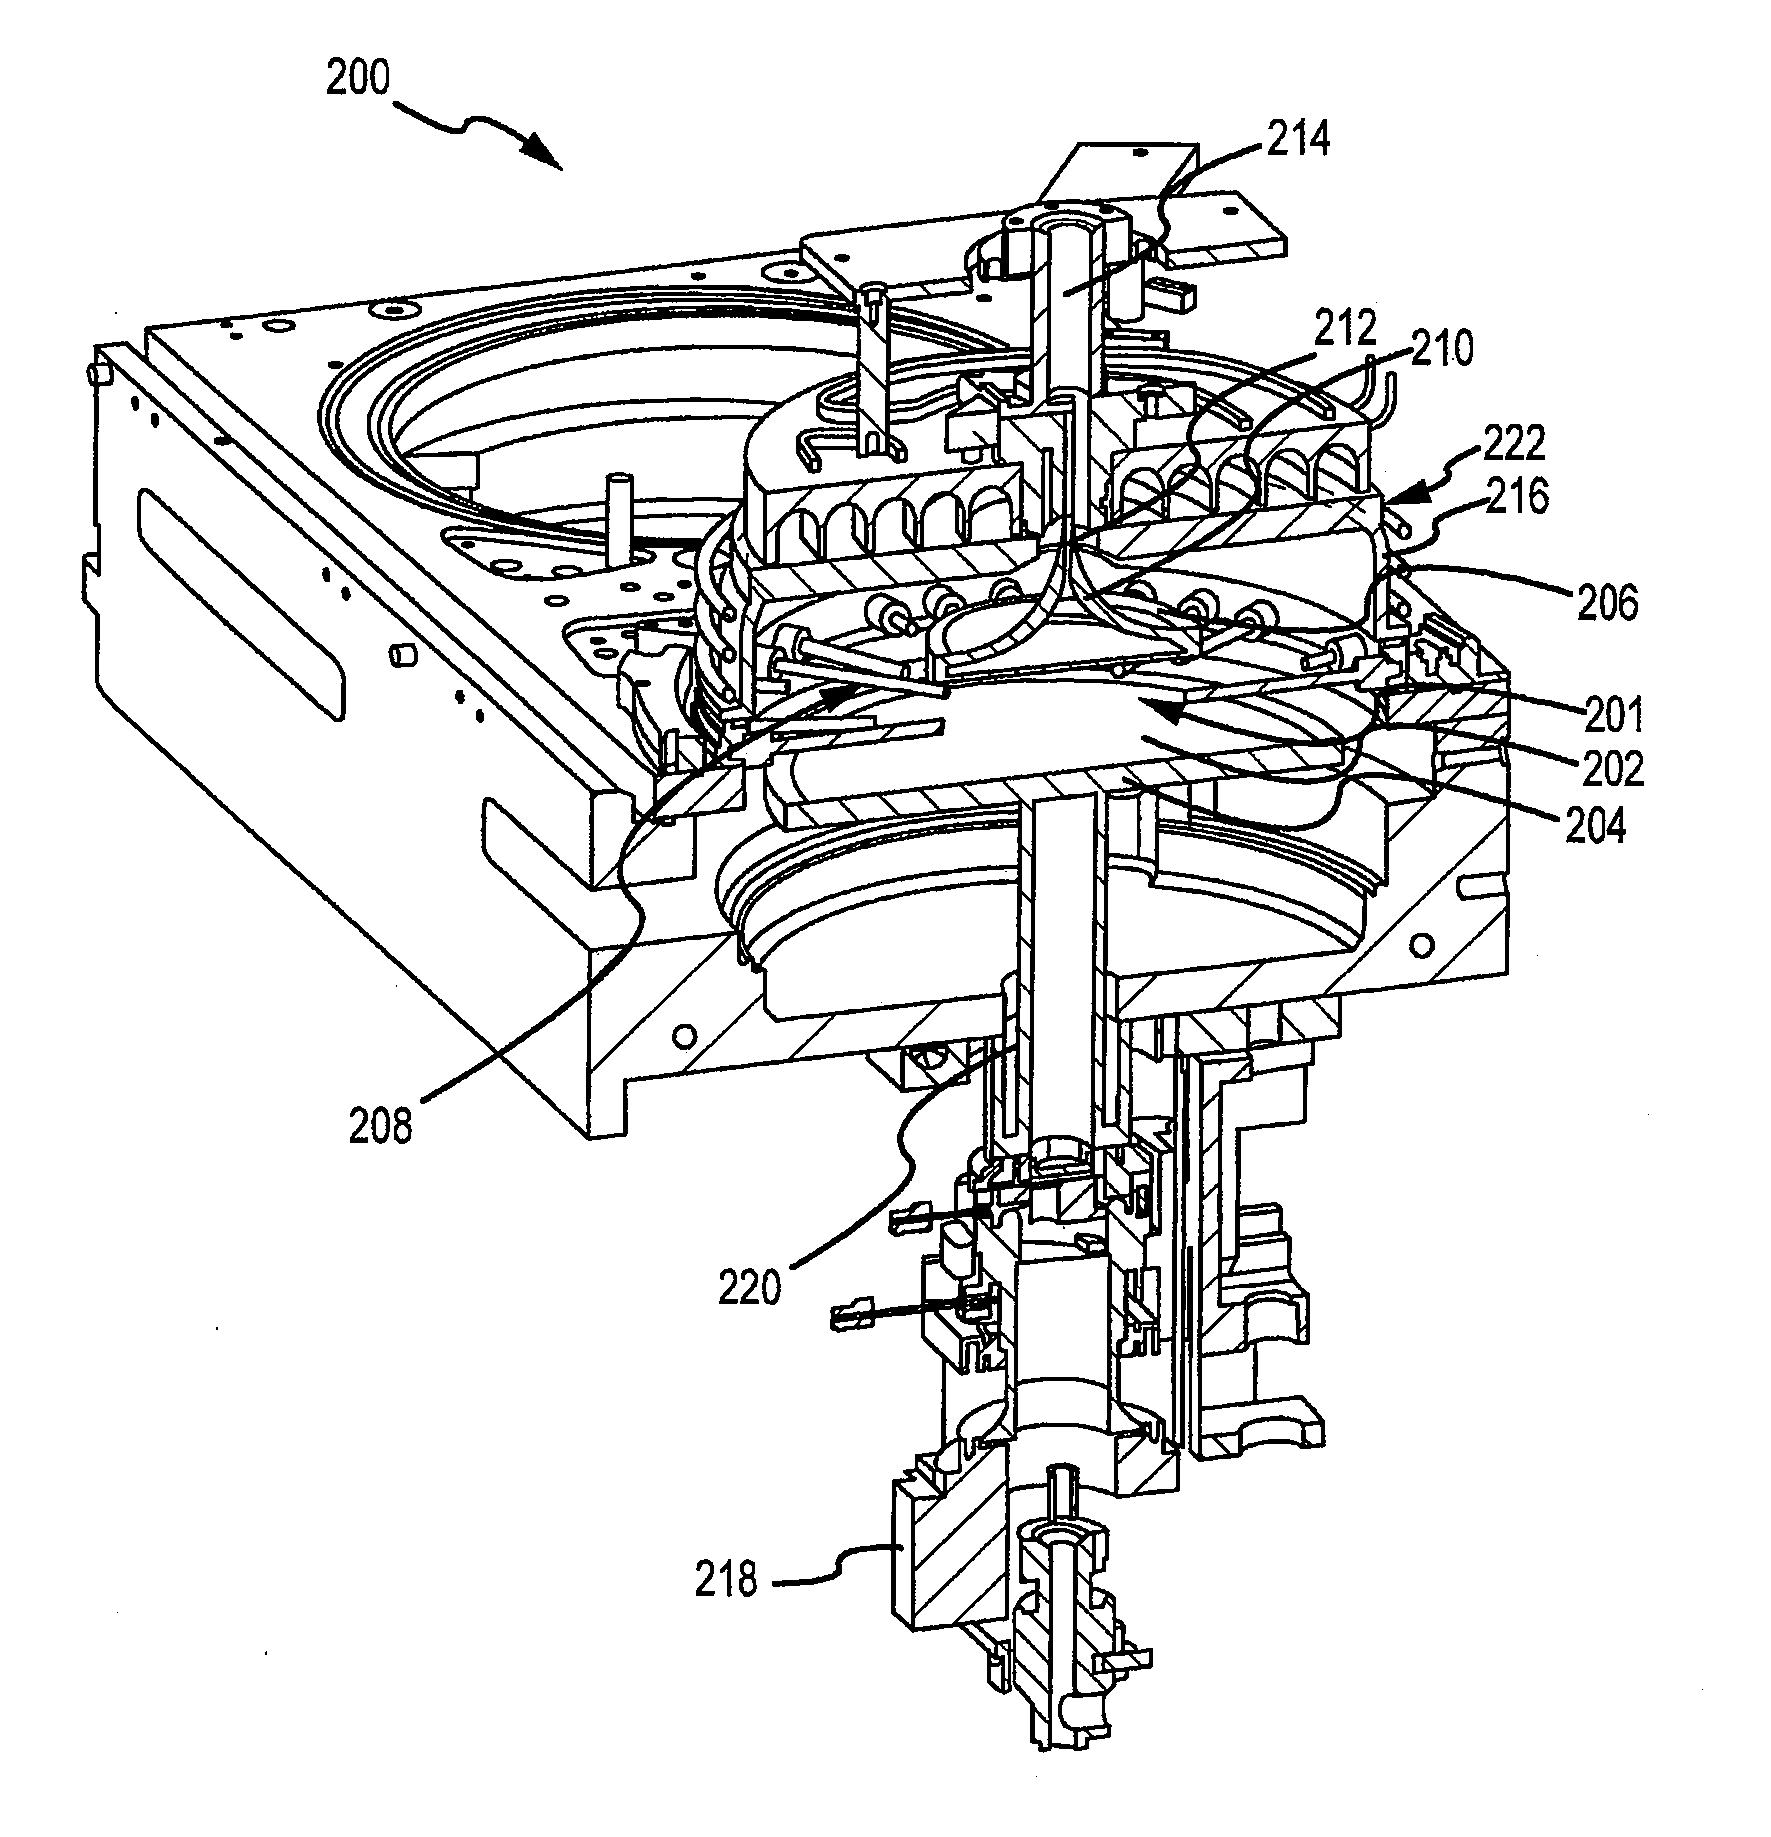 Process chamber for dielectric gapfill